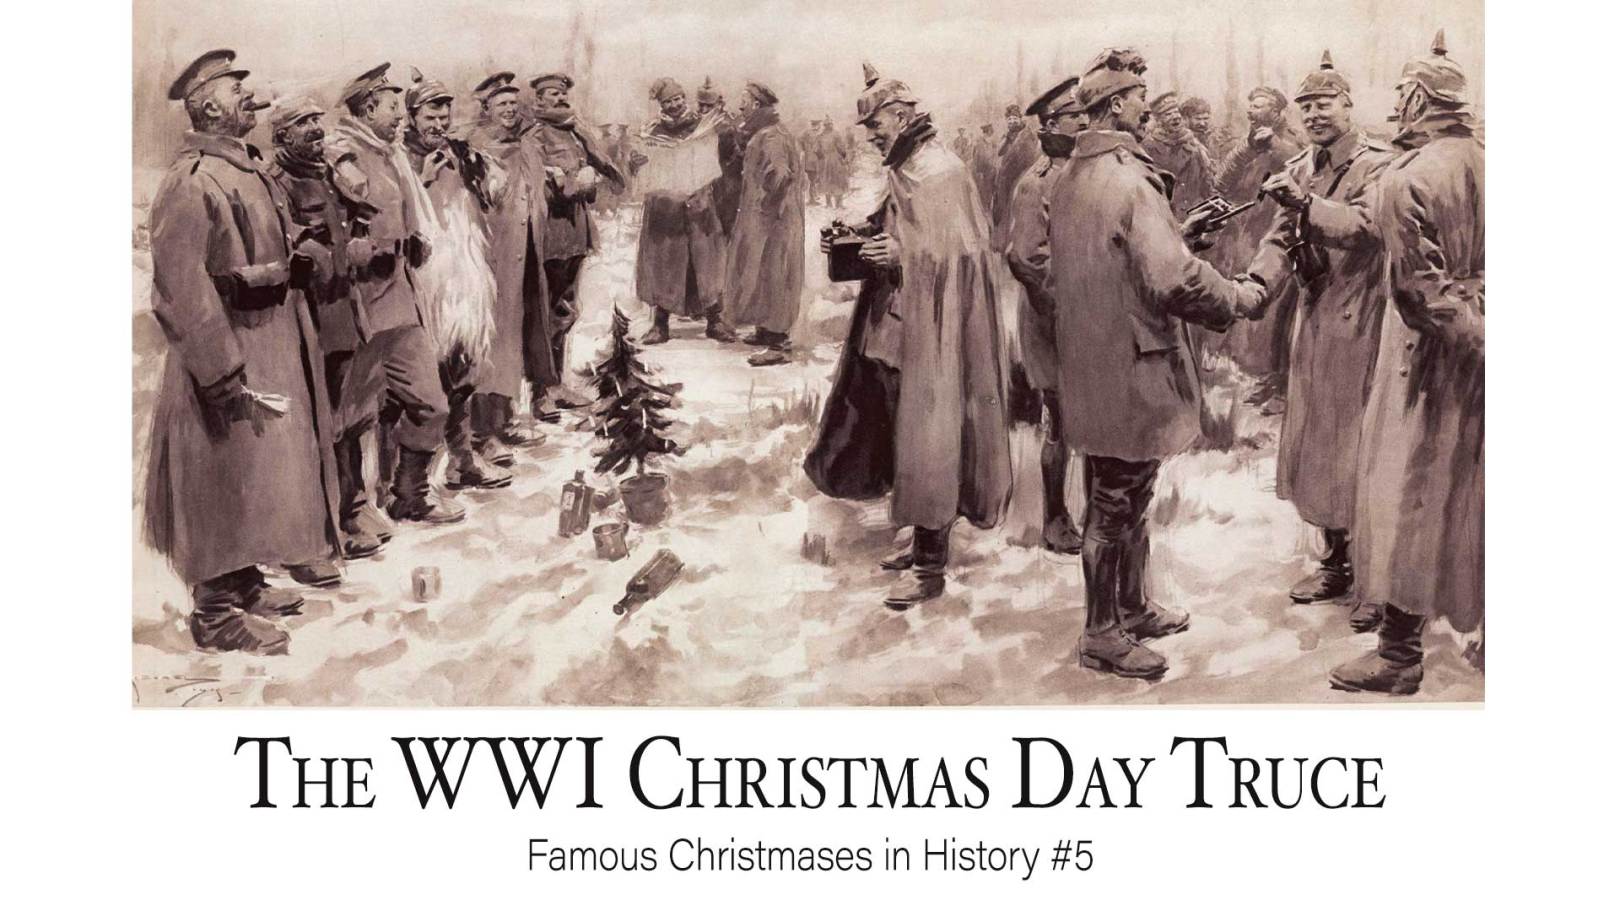 The WWI Christmas Day Truce: Famous Christmases in History #5